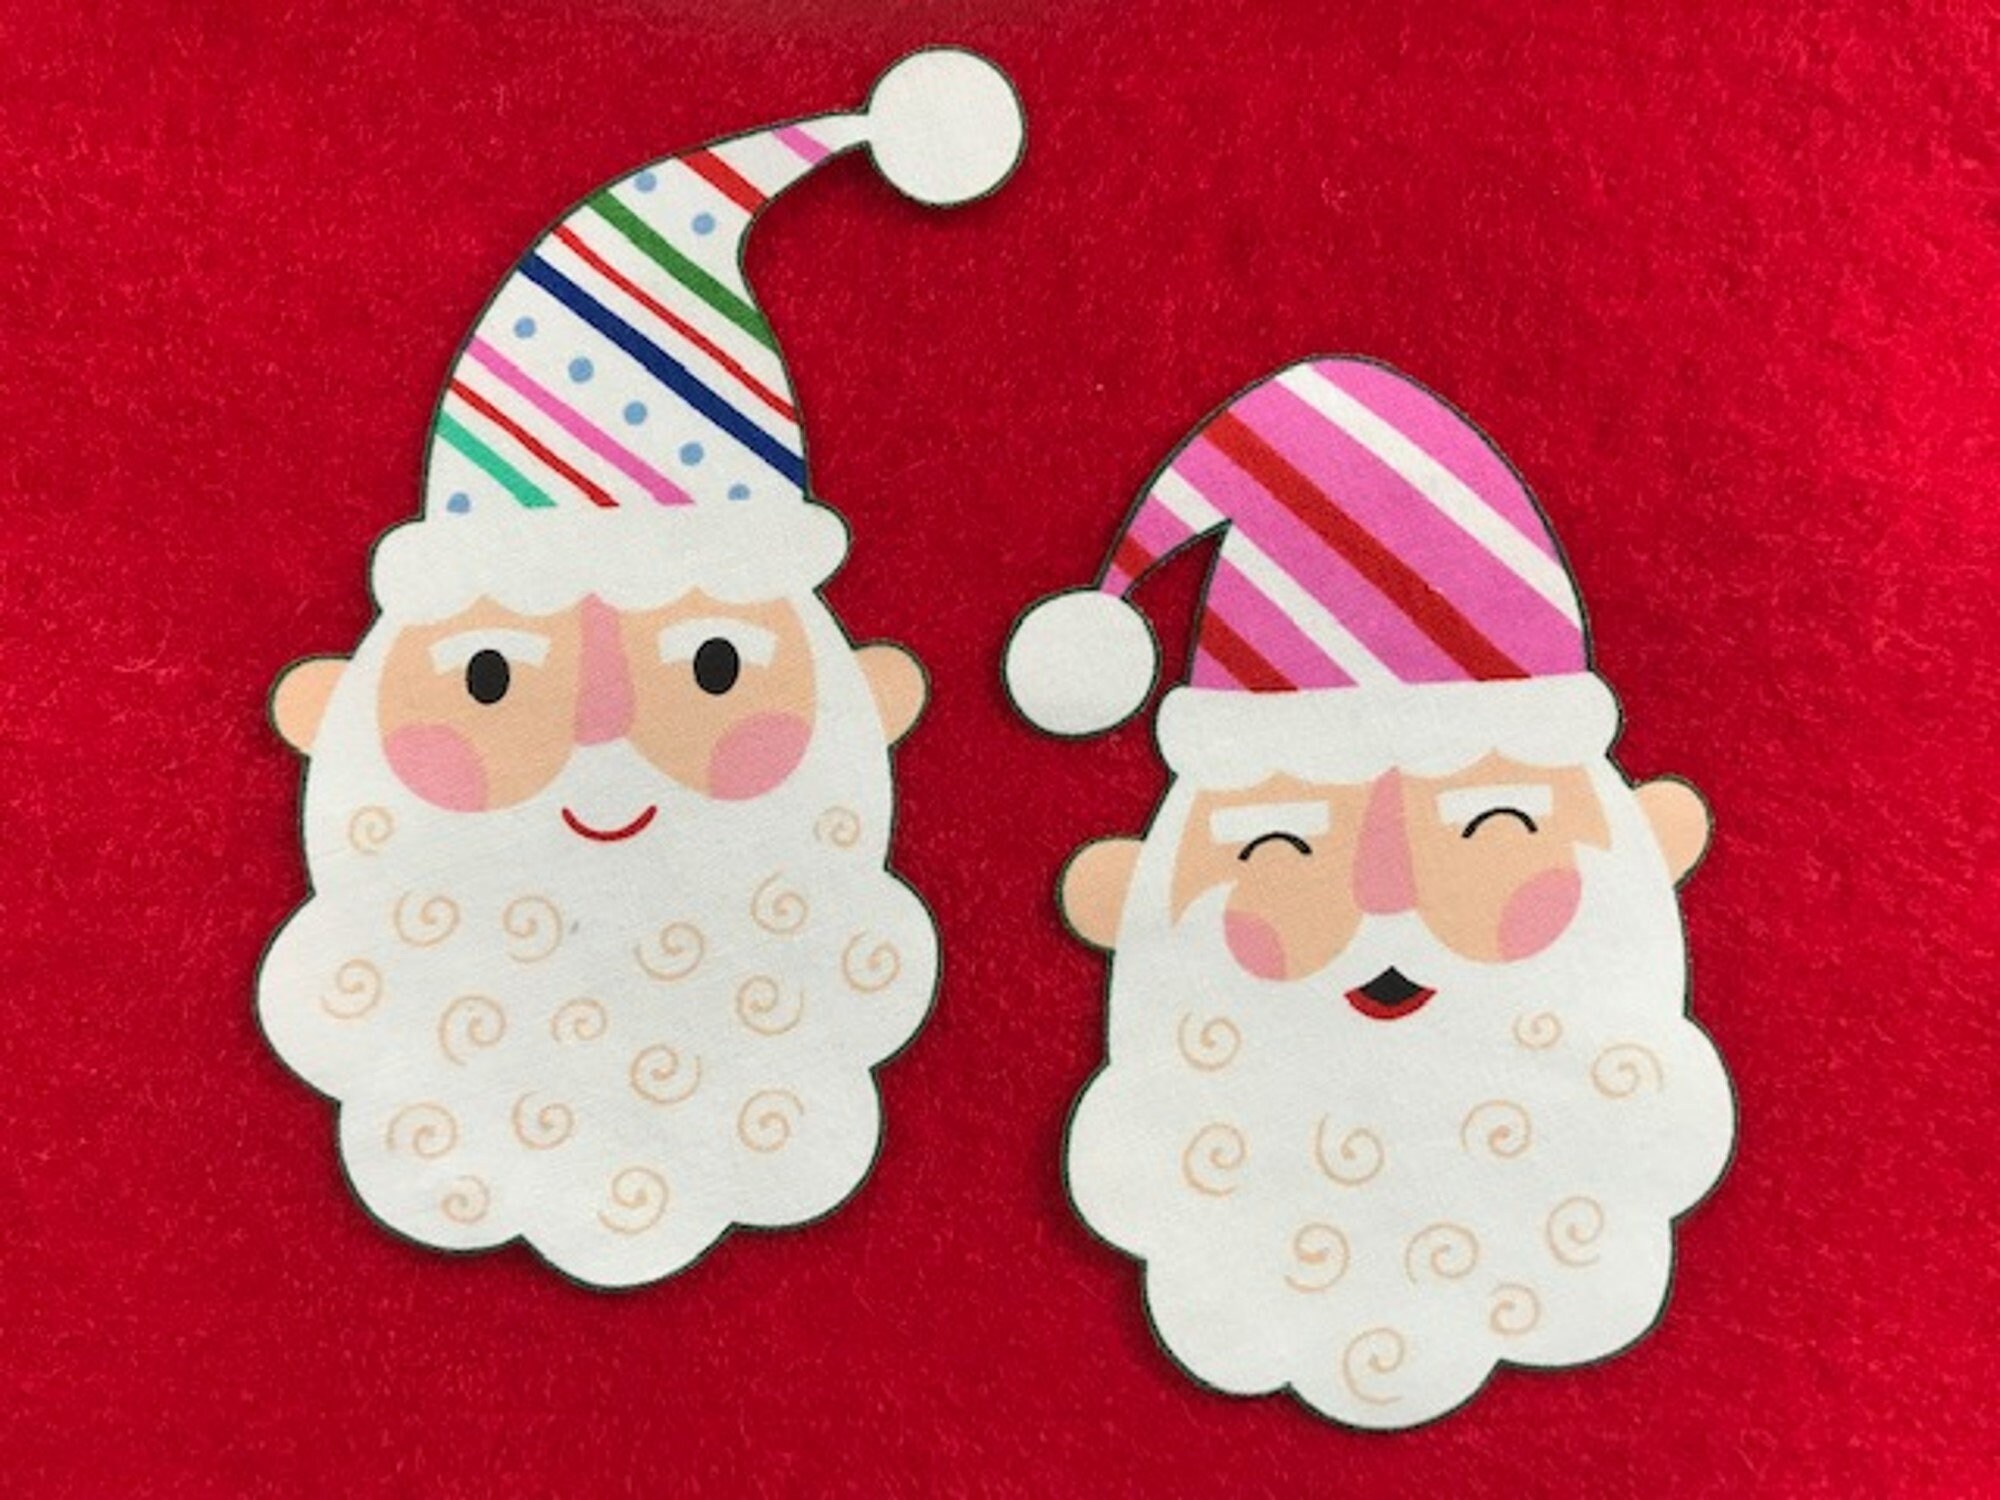 Santa Tree Snowman Tree Embroidered Patches 25pcs Assorted Christmas Patches On Or Sew On Patches Applique for DIY Crafts Clothes Backpacks 